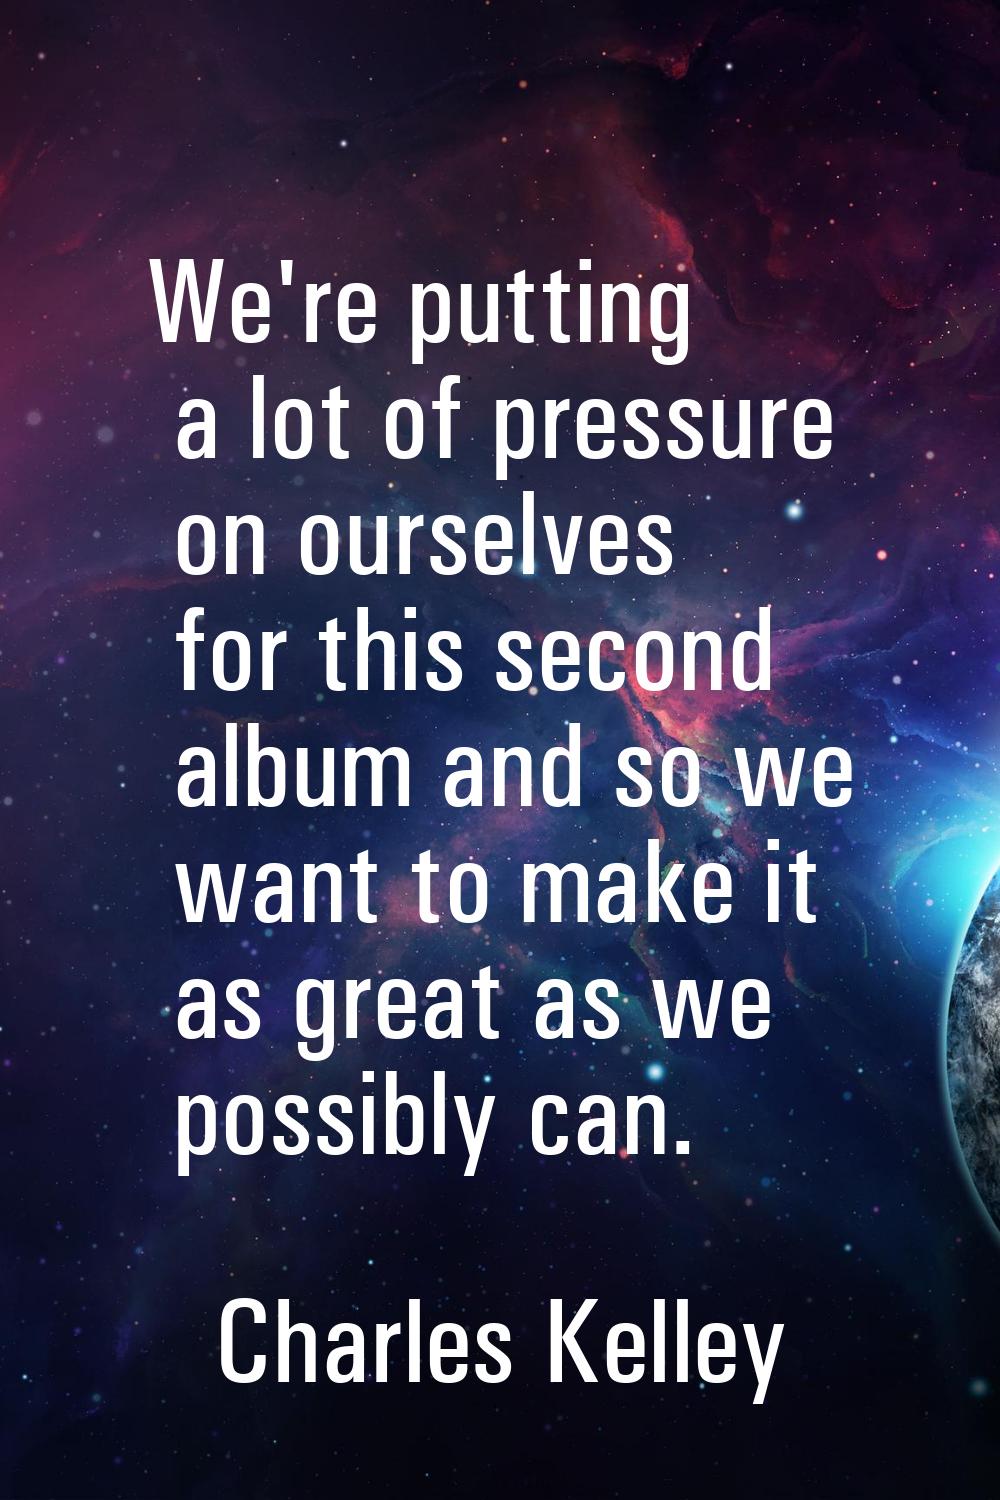 We're putting a lot of pressure on ourselves for this second album and so we want to make it as gre